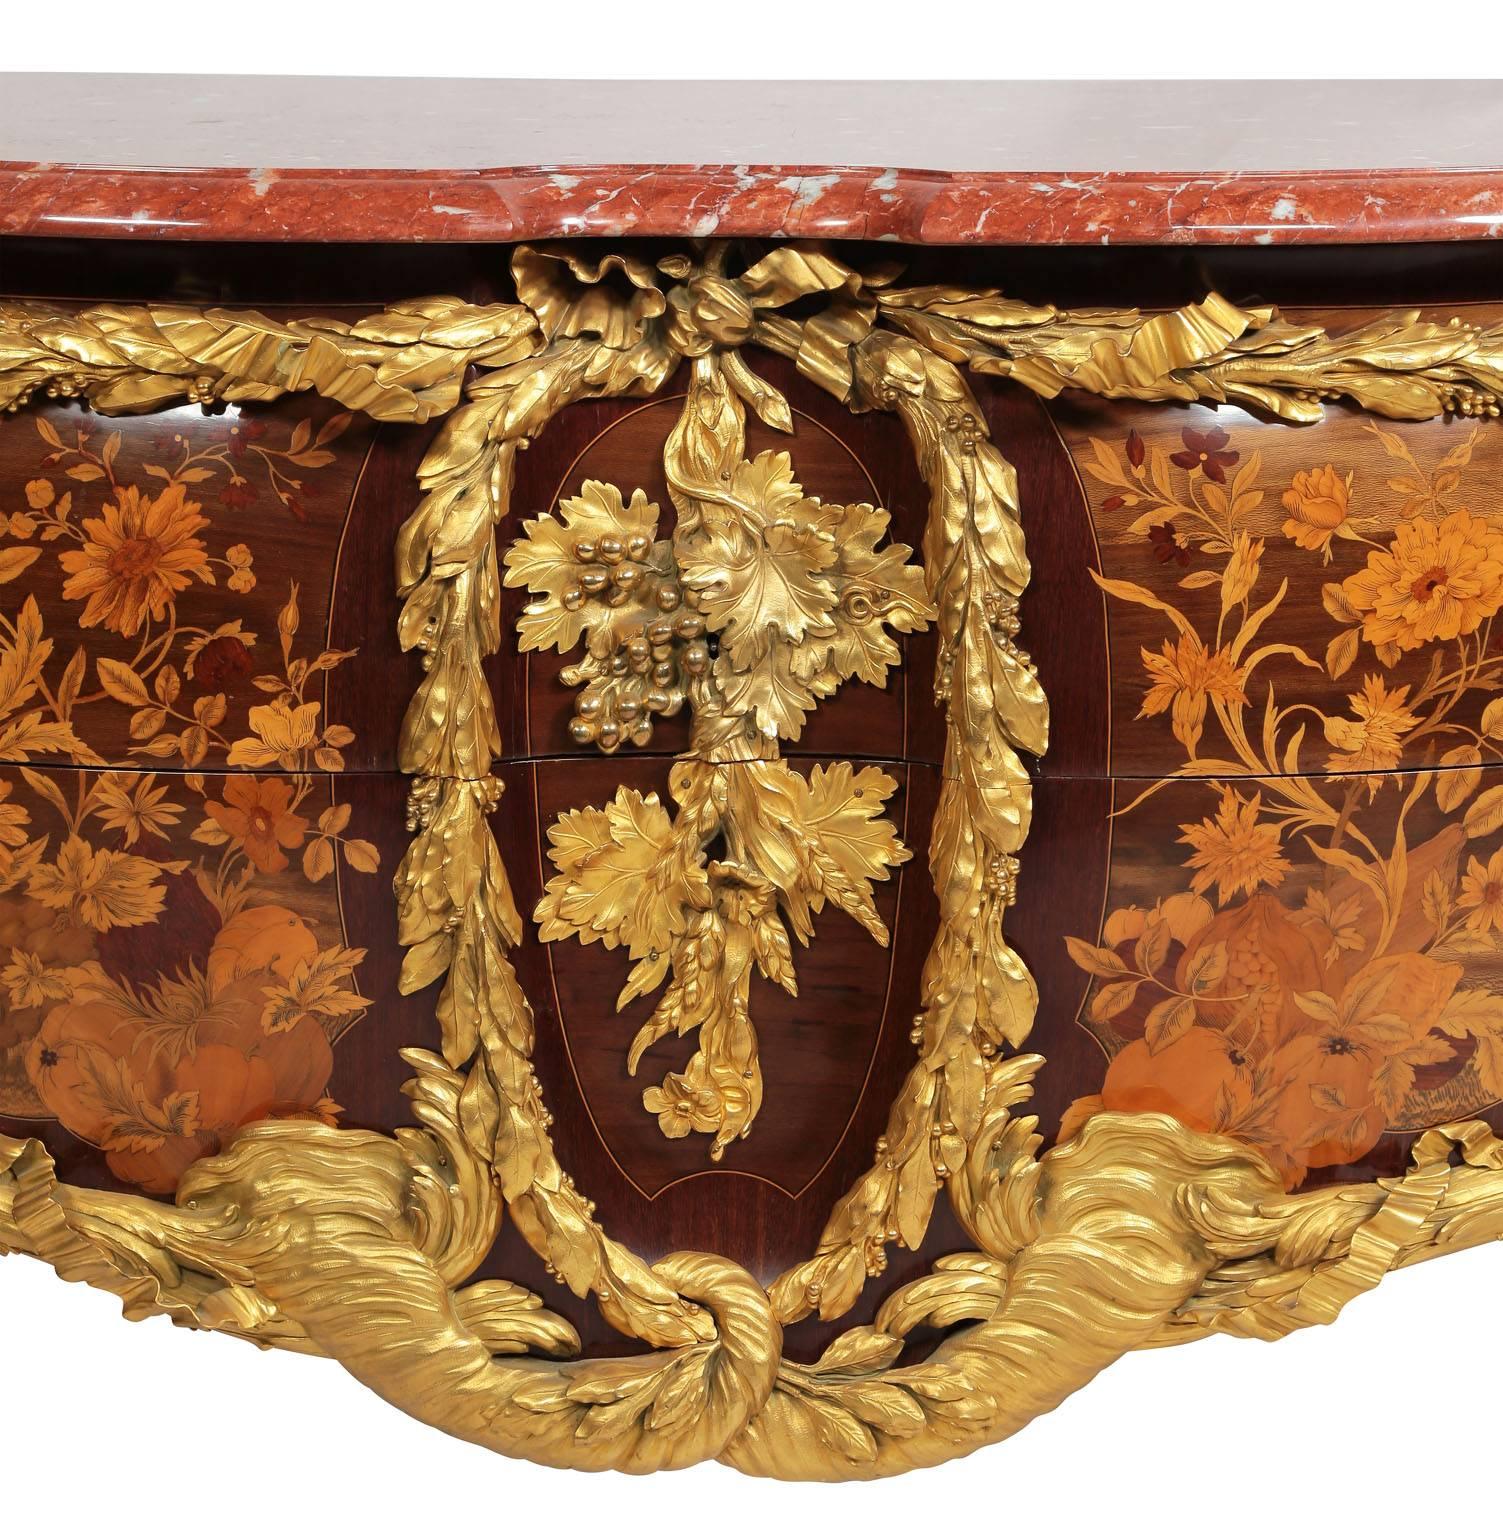 A French Louis XV style ormolu-mounted and end-cut floral and fruit marquetry two-drawer serpentine-shaped bombé commode by François Linke (1855-1946), Index number 720, the mounts designed by Leon Messagé, Circa 1910-1915. The serpentine-shaped